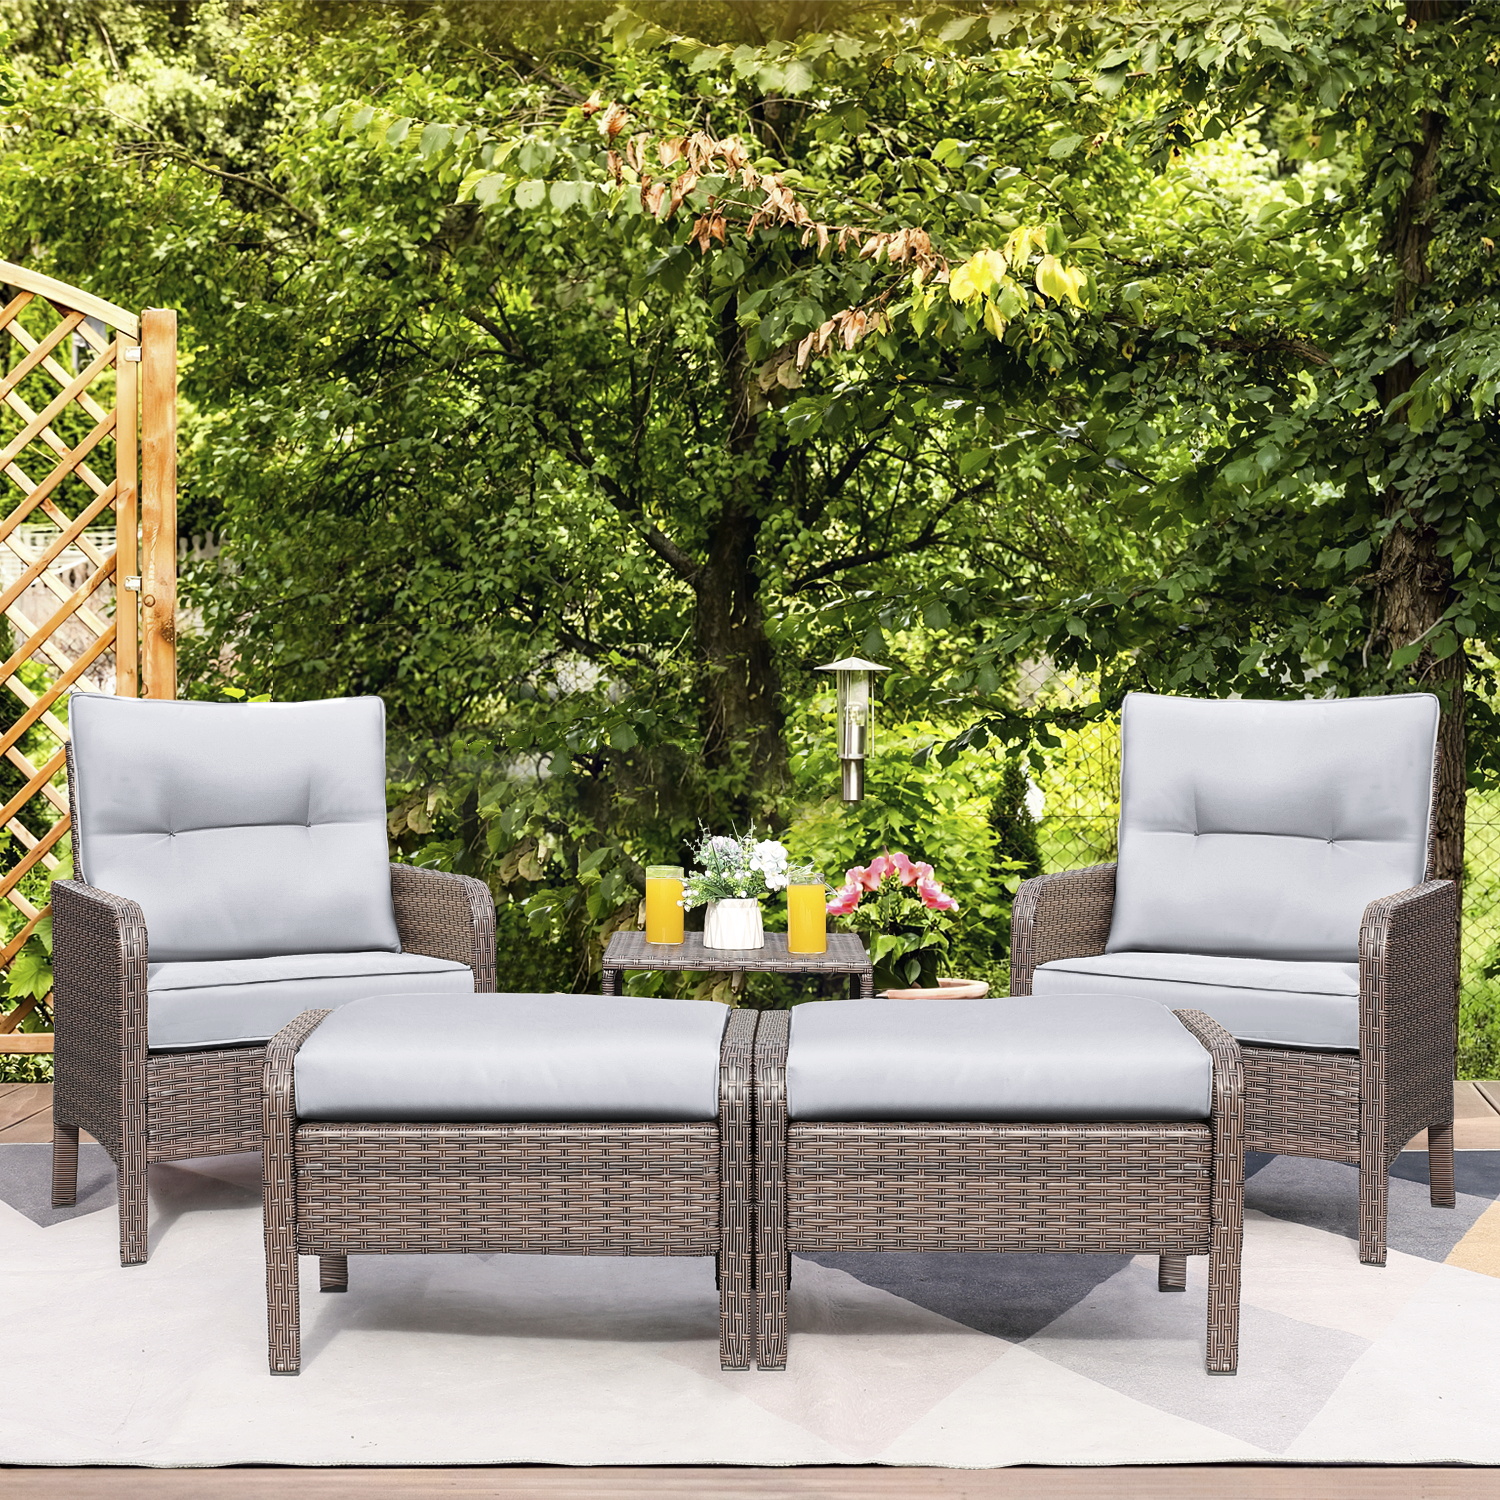 LACOO 5 Pieces Wicker Patio Furniture Set Outdoor Patio Seat Conversation Cushion Chairs with Table & Ottomans, Gray - image 1 of 8